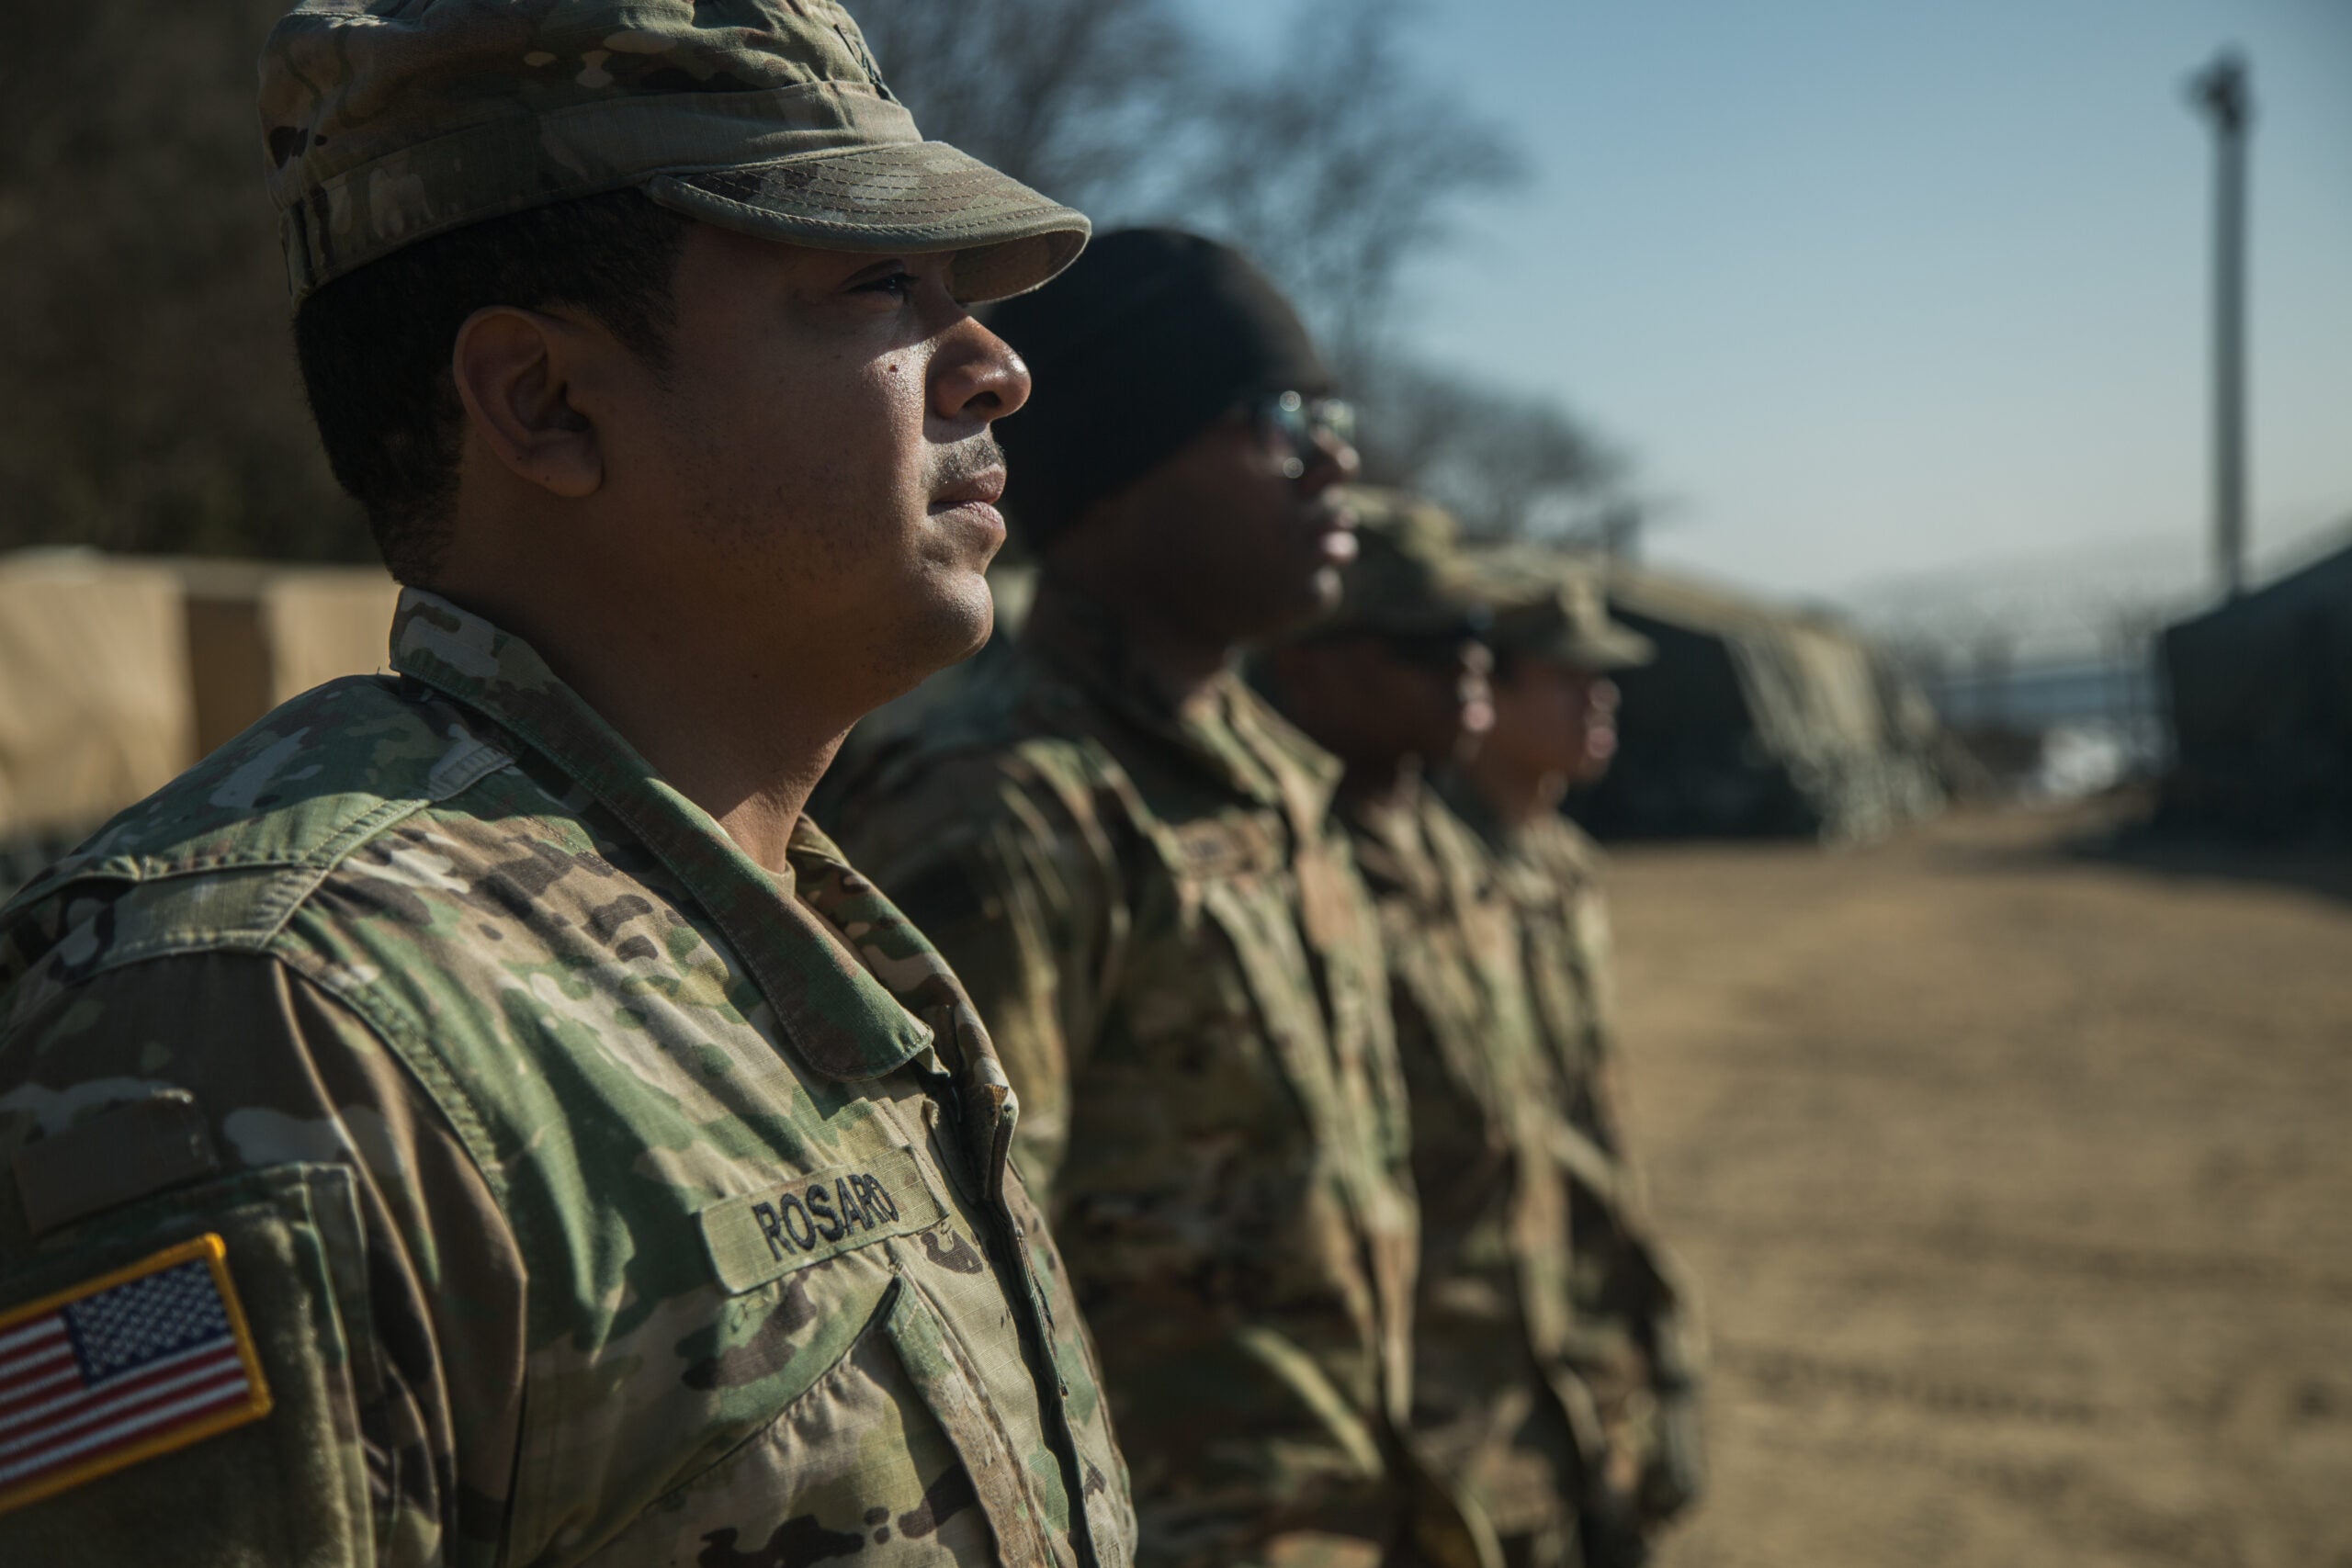 U.S. Army Soldiers, assigned to Bravo Company, 304th Expeditionary Signal Battalion, 1st Signal Brigade, stands at attention during Spc. Alister Pierce re-enlistment ceremony in South Korea, Jan. 30, 2018. Pierce re-enlisted after serving five years in the Army. (U.S. Army photo by Pfc. Isaih Vega)